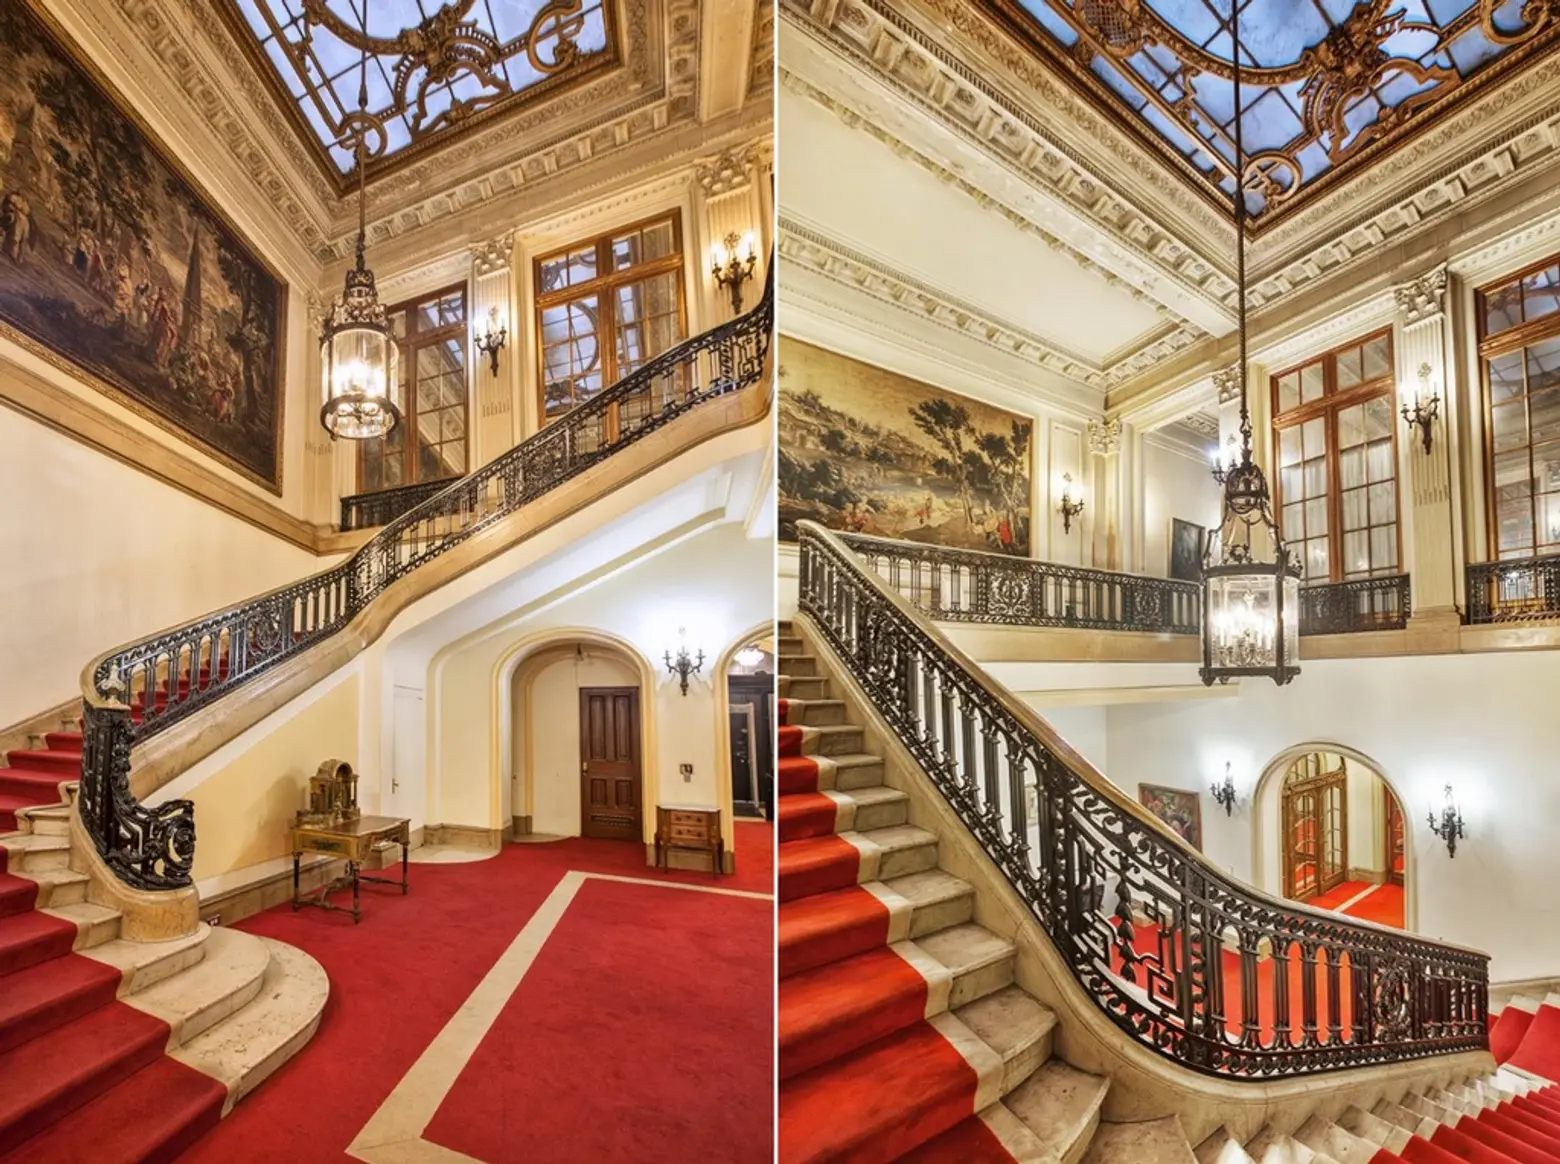 Manhattan’s last intact Gilded Age mansion can be yours for $50M